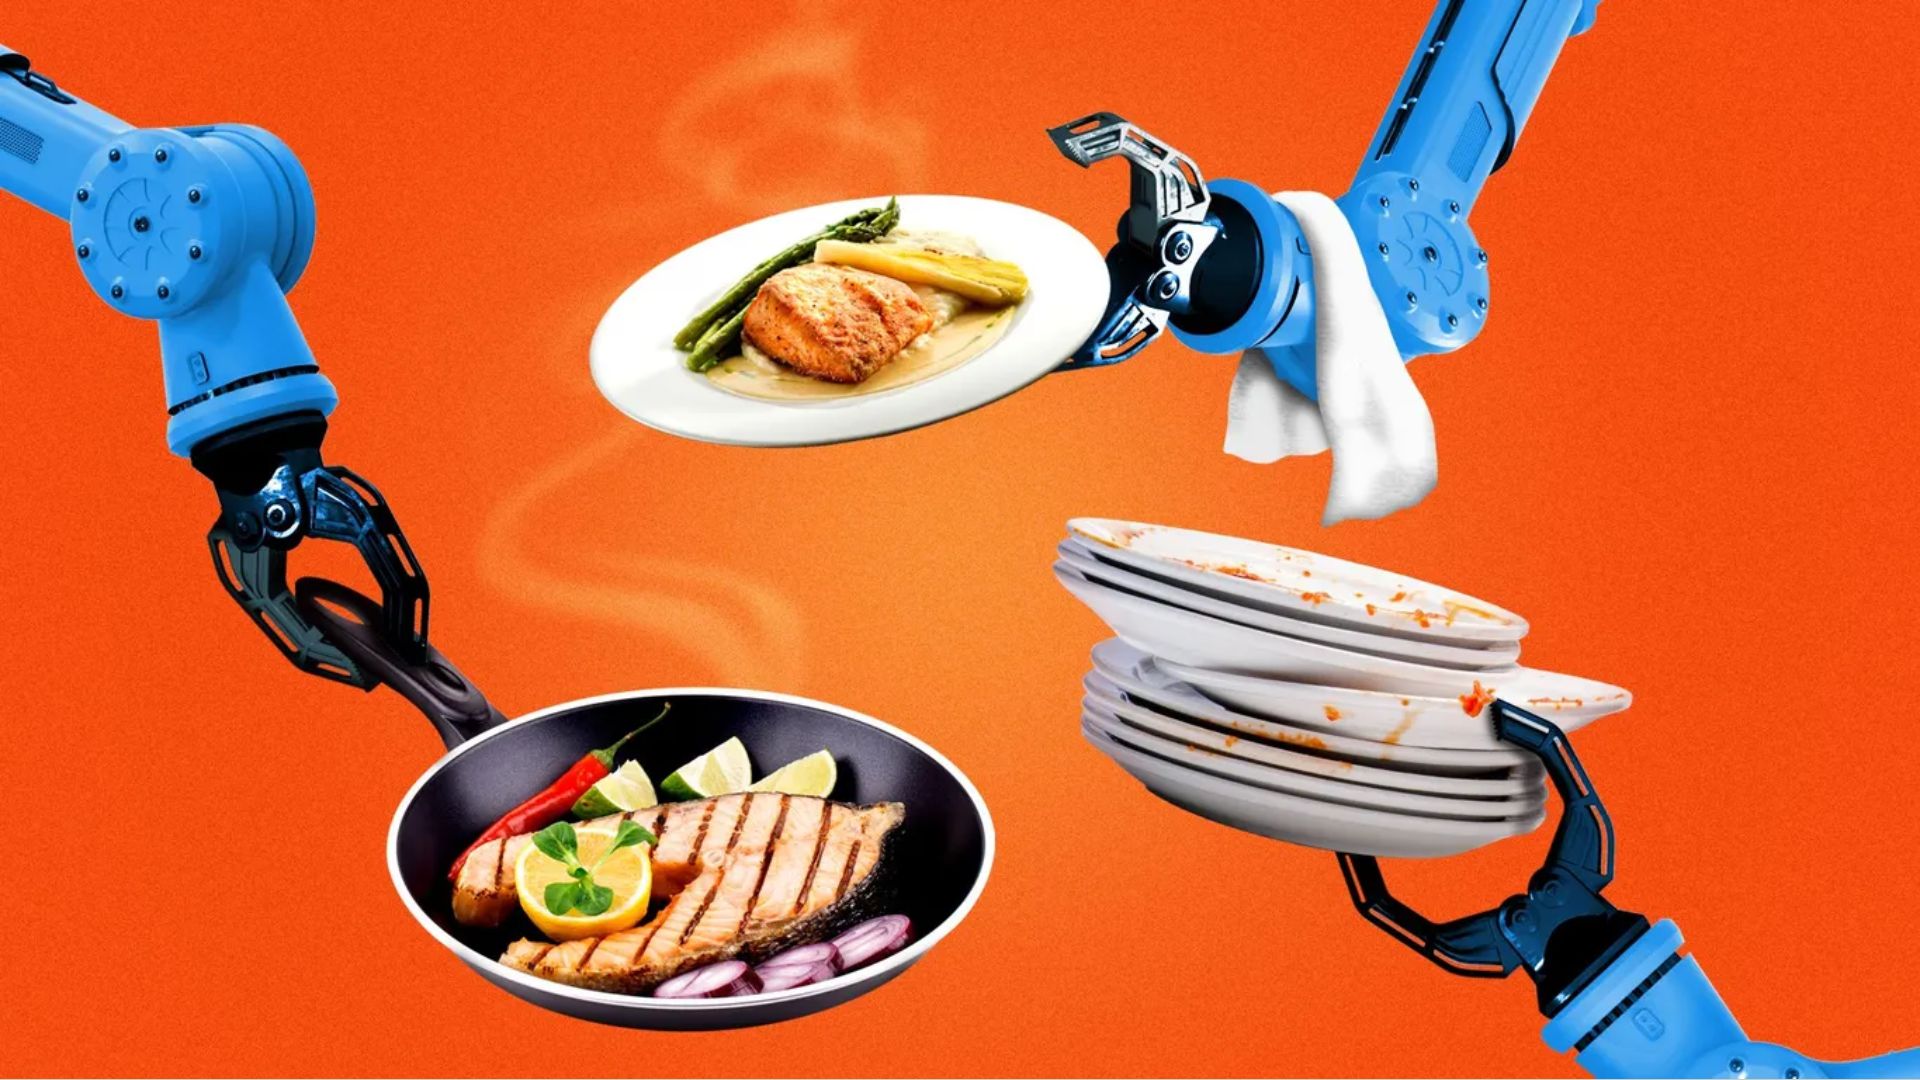 Restaurant robots can cook, serve and bus your meal now